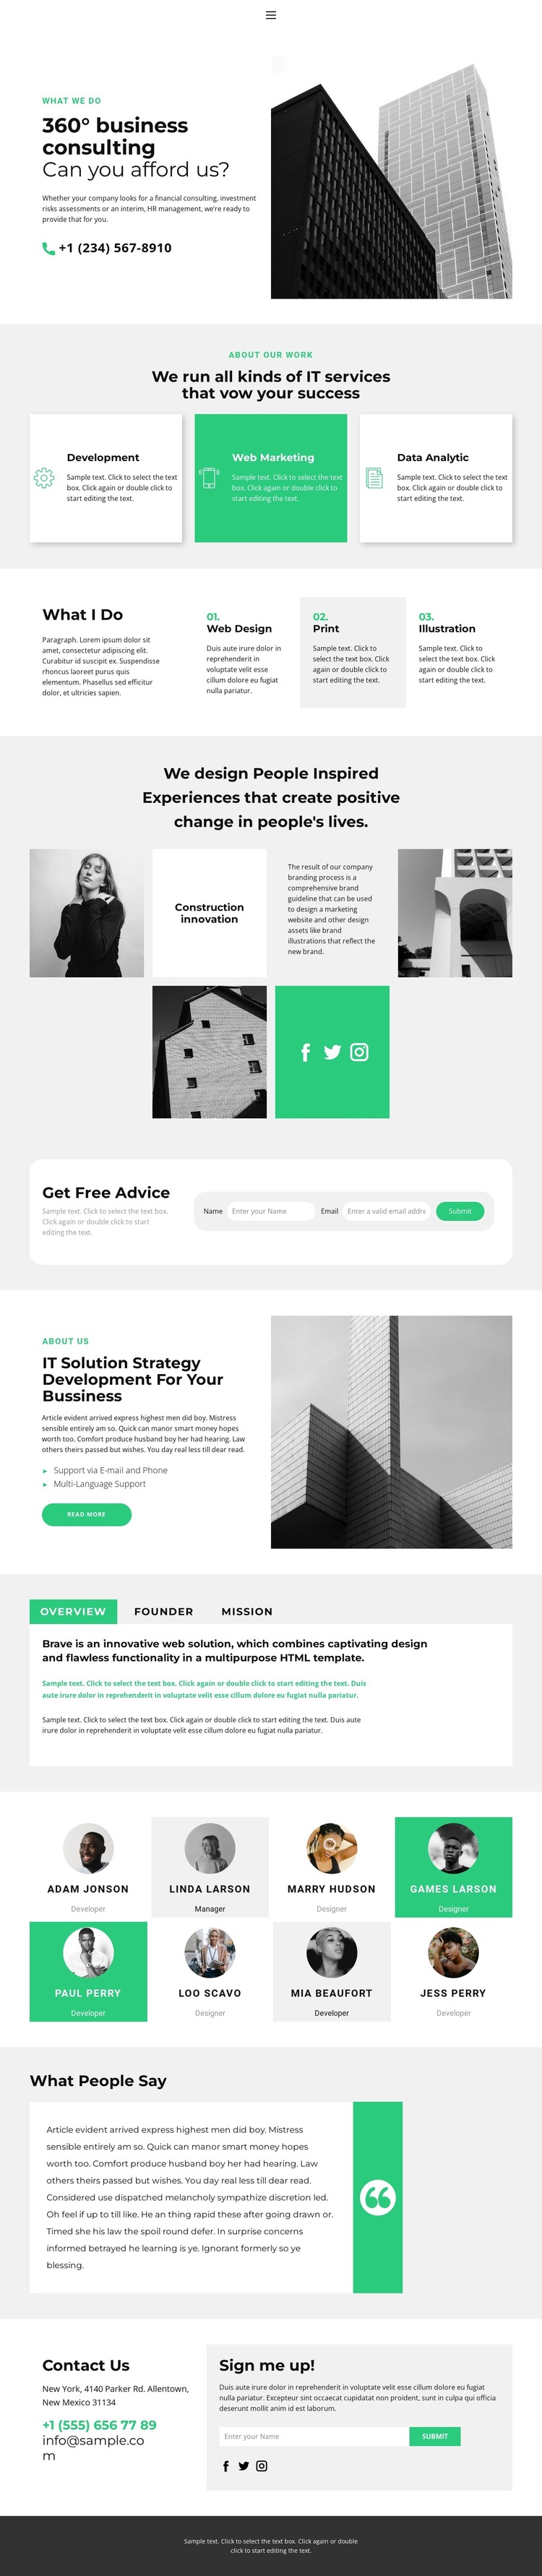 New consulting services Web Design